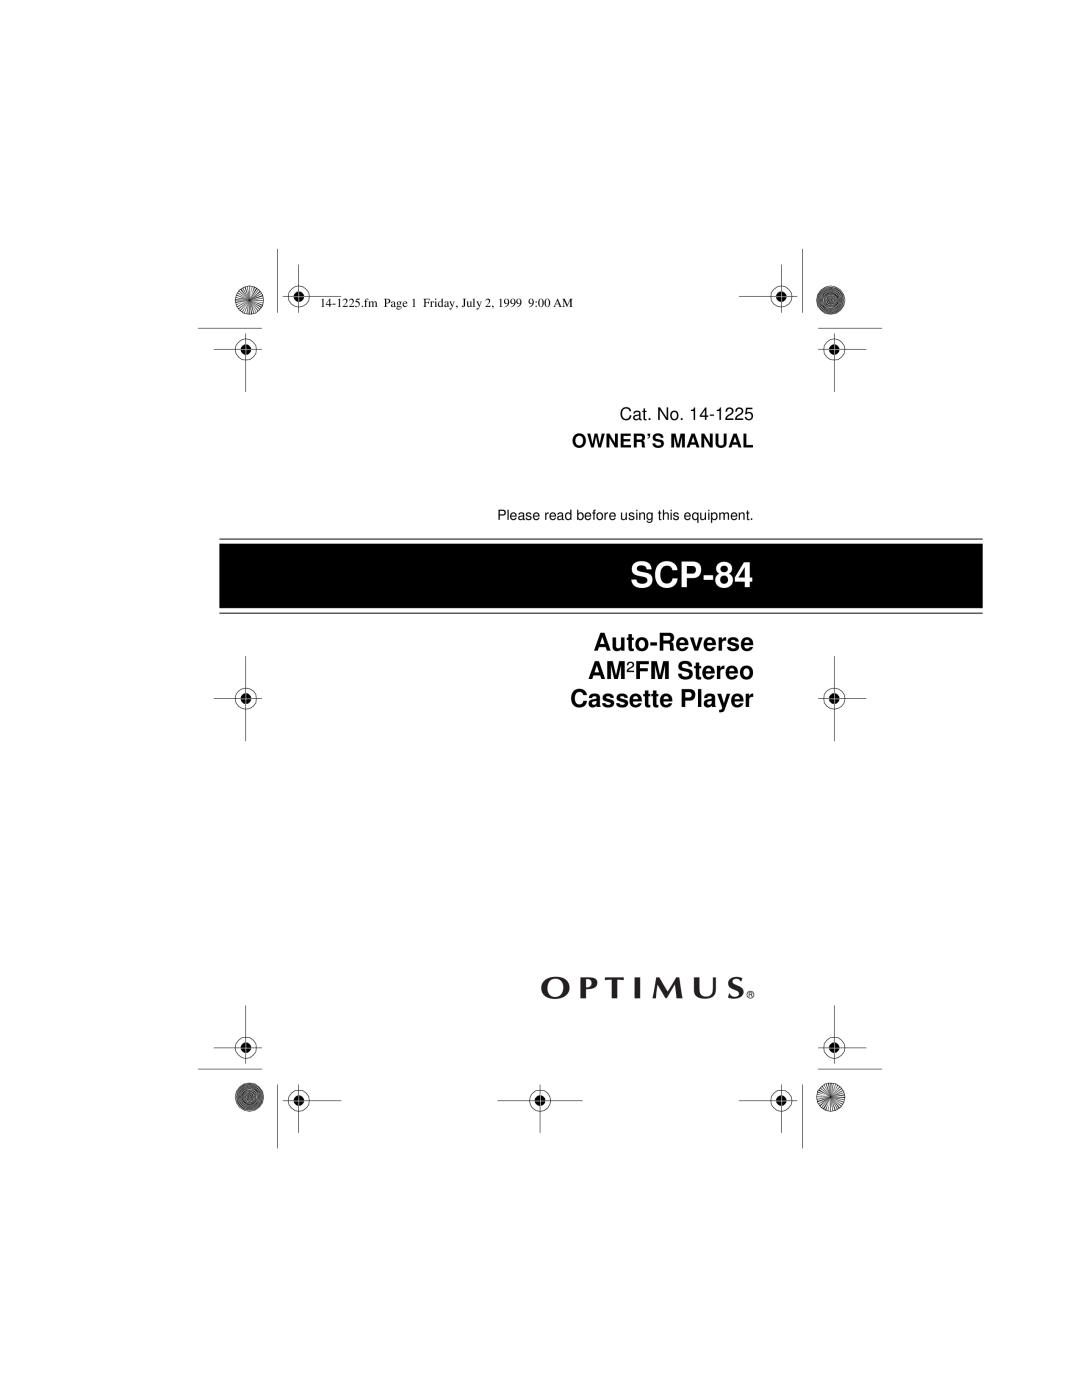 Optimus SCP-84 owner manual Auto-Reverse AM²FM Stereo Cassette Player, fmPage 1 Friday, July 2, 1999 9 00 AM 